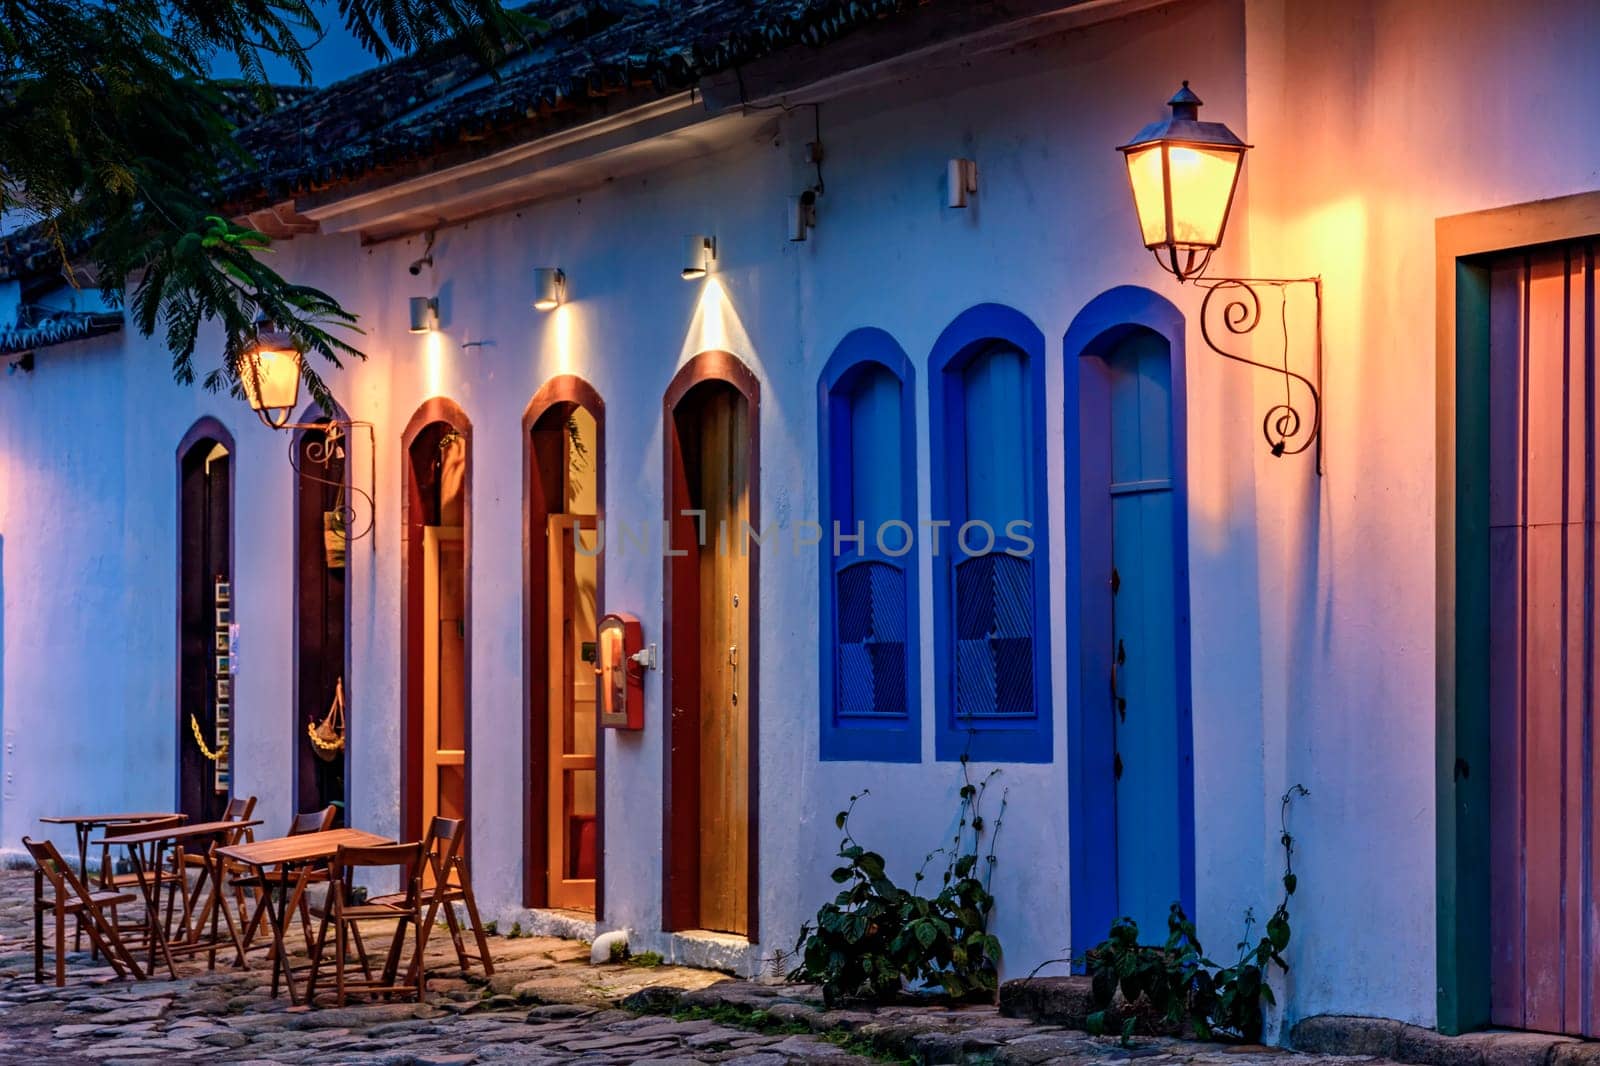 Street and colonial style houses illuminate at night in the city of Paraty on the coast of Rio de Janeiro, Brazil